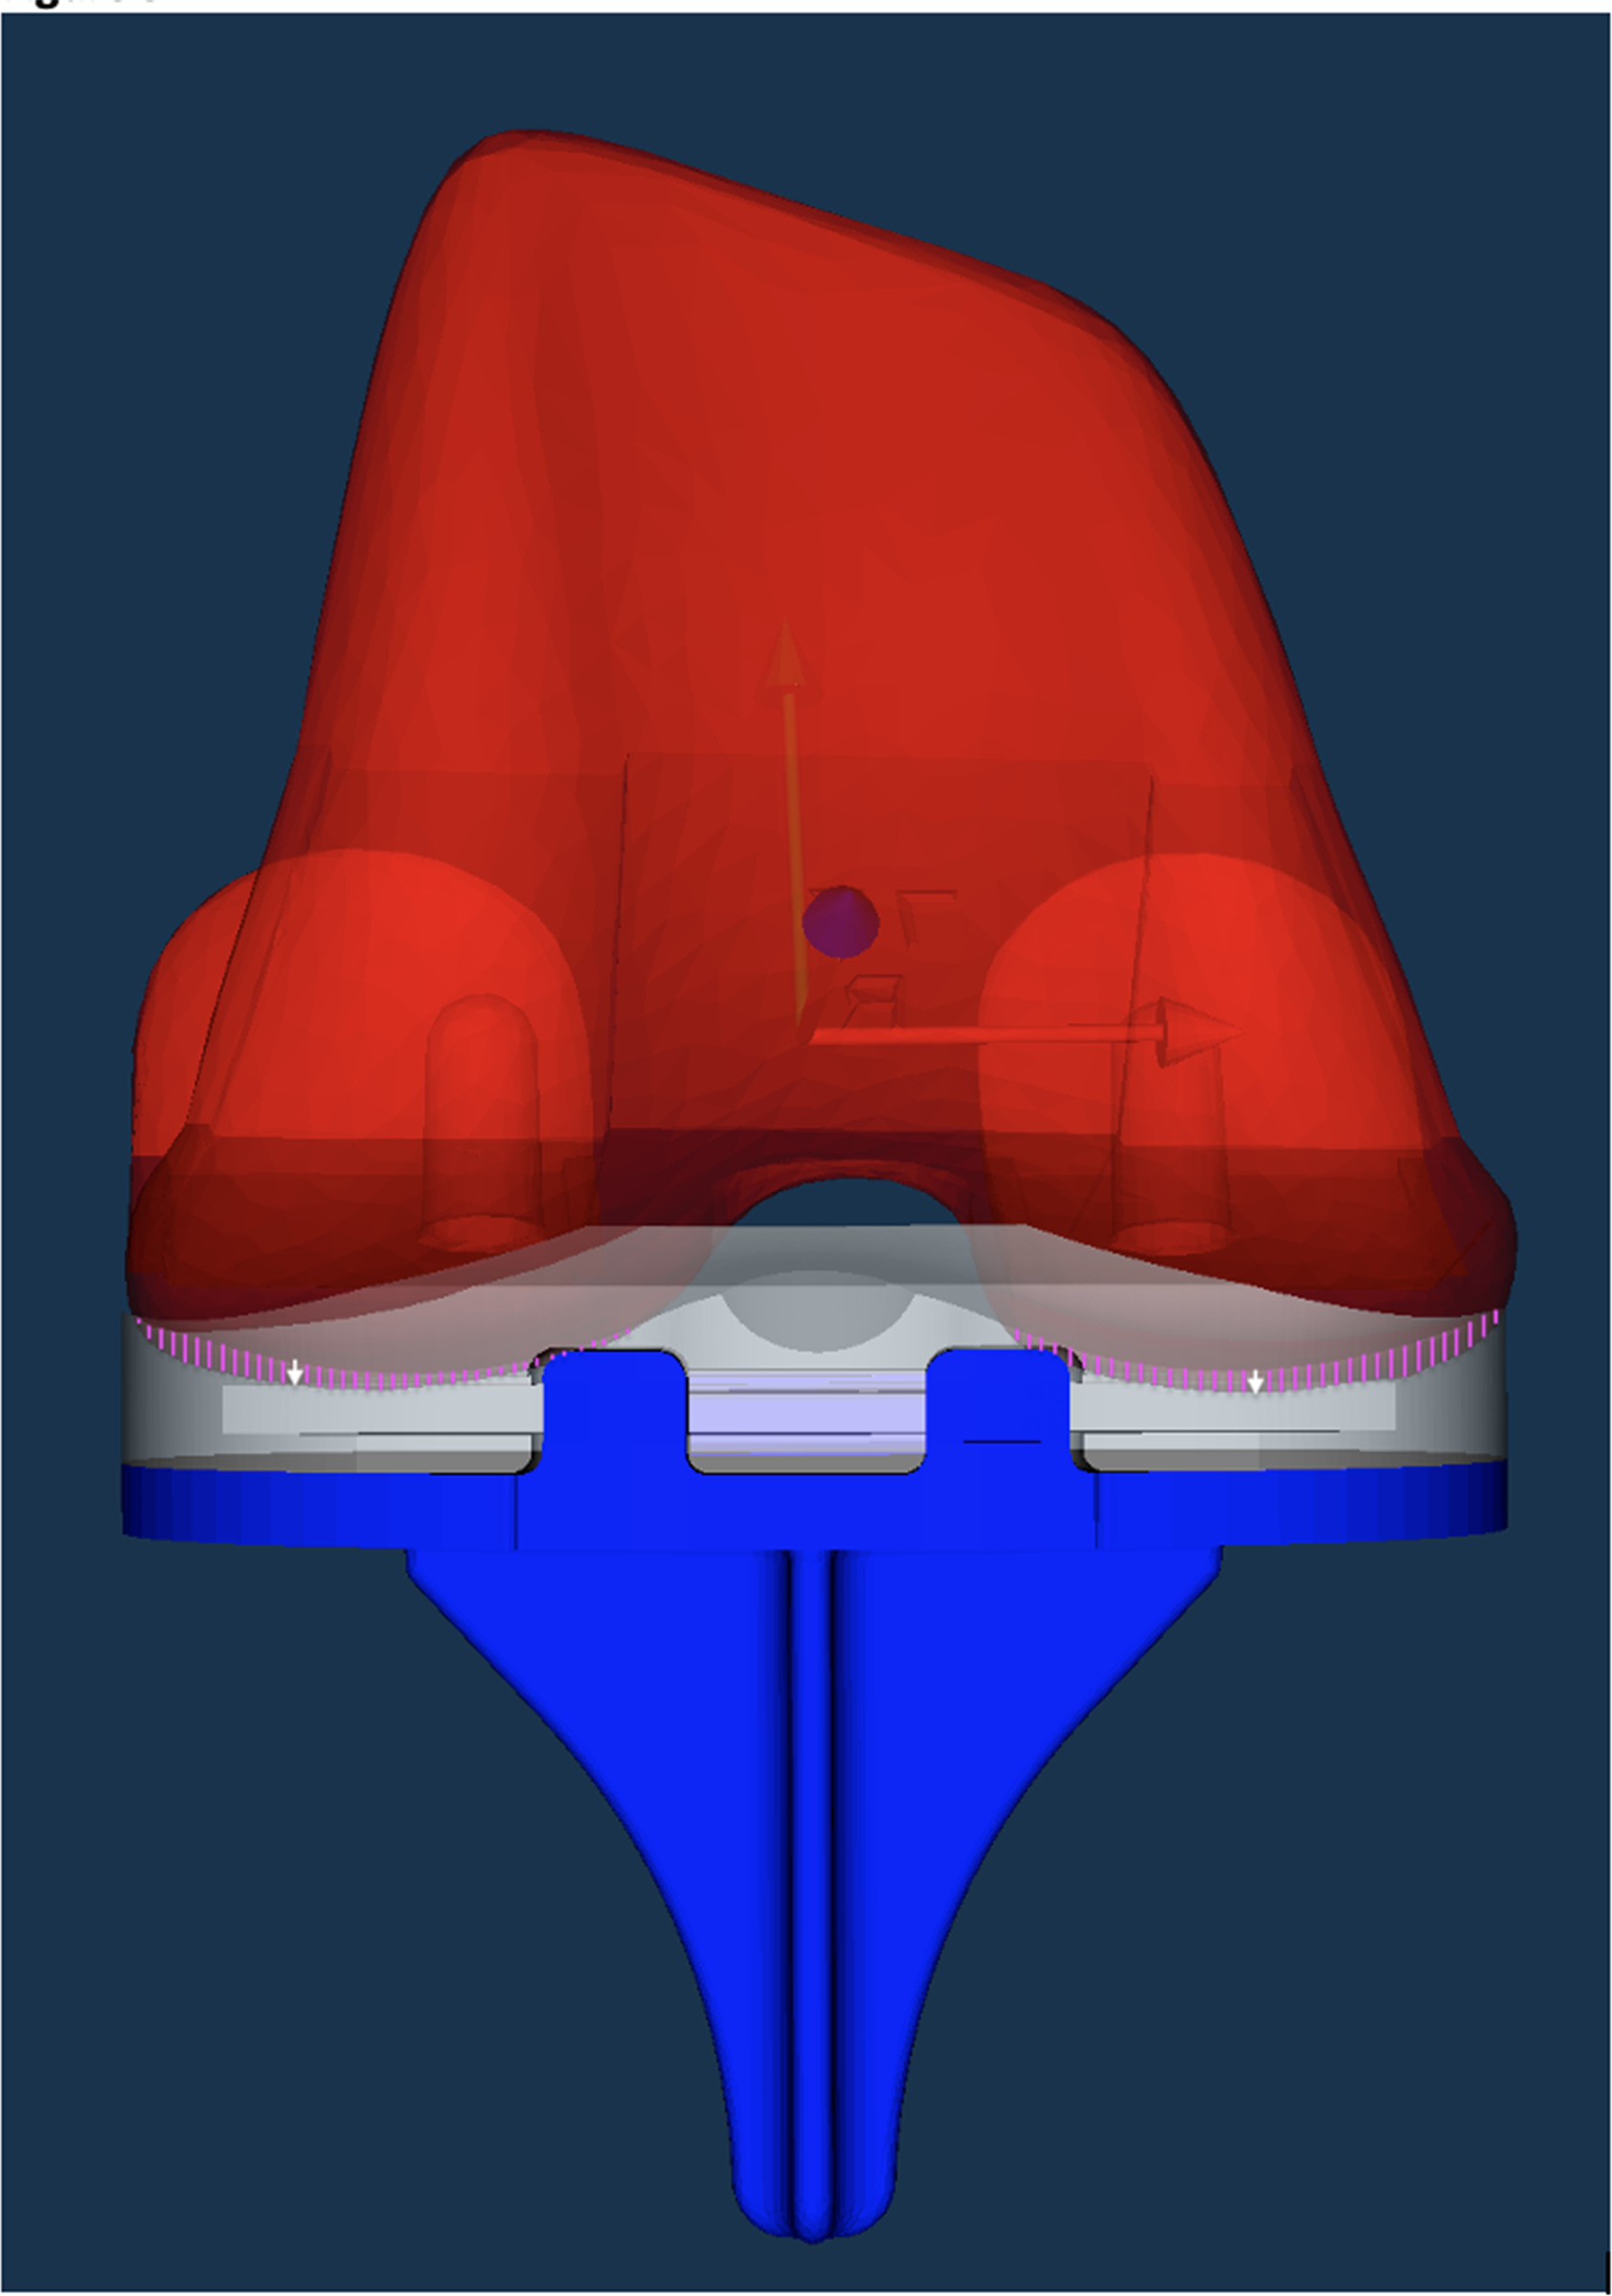 Fig. 5 
            View of the computer-aided design models of the femoral component (red), the polyethylene (PE) inlay (white), and the tibial component (blue). The white arrows indicate the point of deepest penetration of the femoral component into the PE inlay at mean six years’ follow-up (minimum joint space width), which reflects the mean PE wear (mm) in the medial and lateral compartments separately (n = 23). Pink shades indicate penetration area.
          